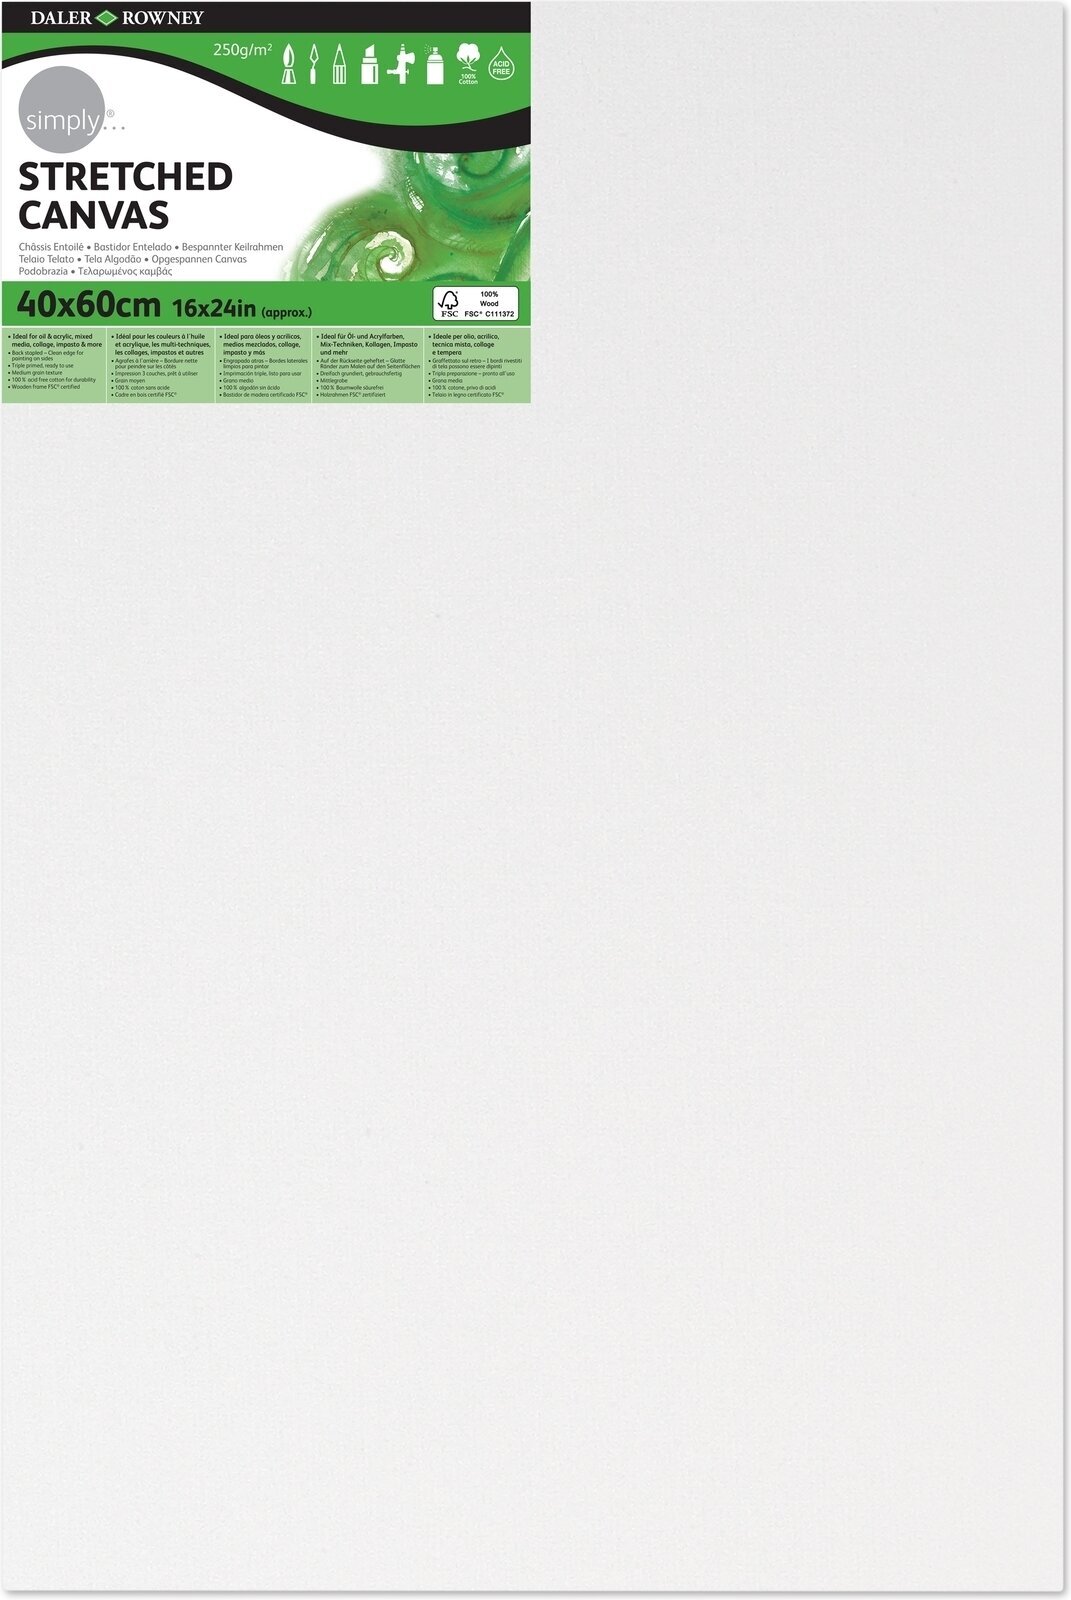 Painting Canvas Daler Rowney Painting Canvas Simply White 40 x 60 cm 1 pc